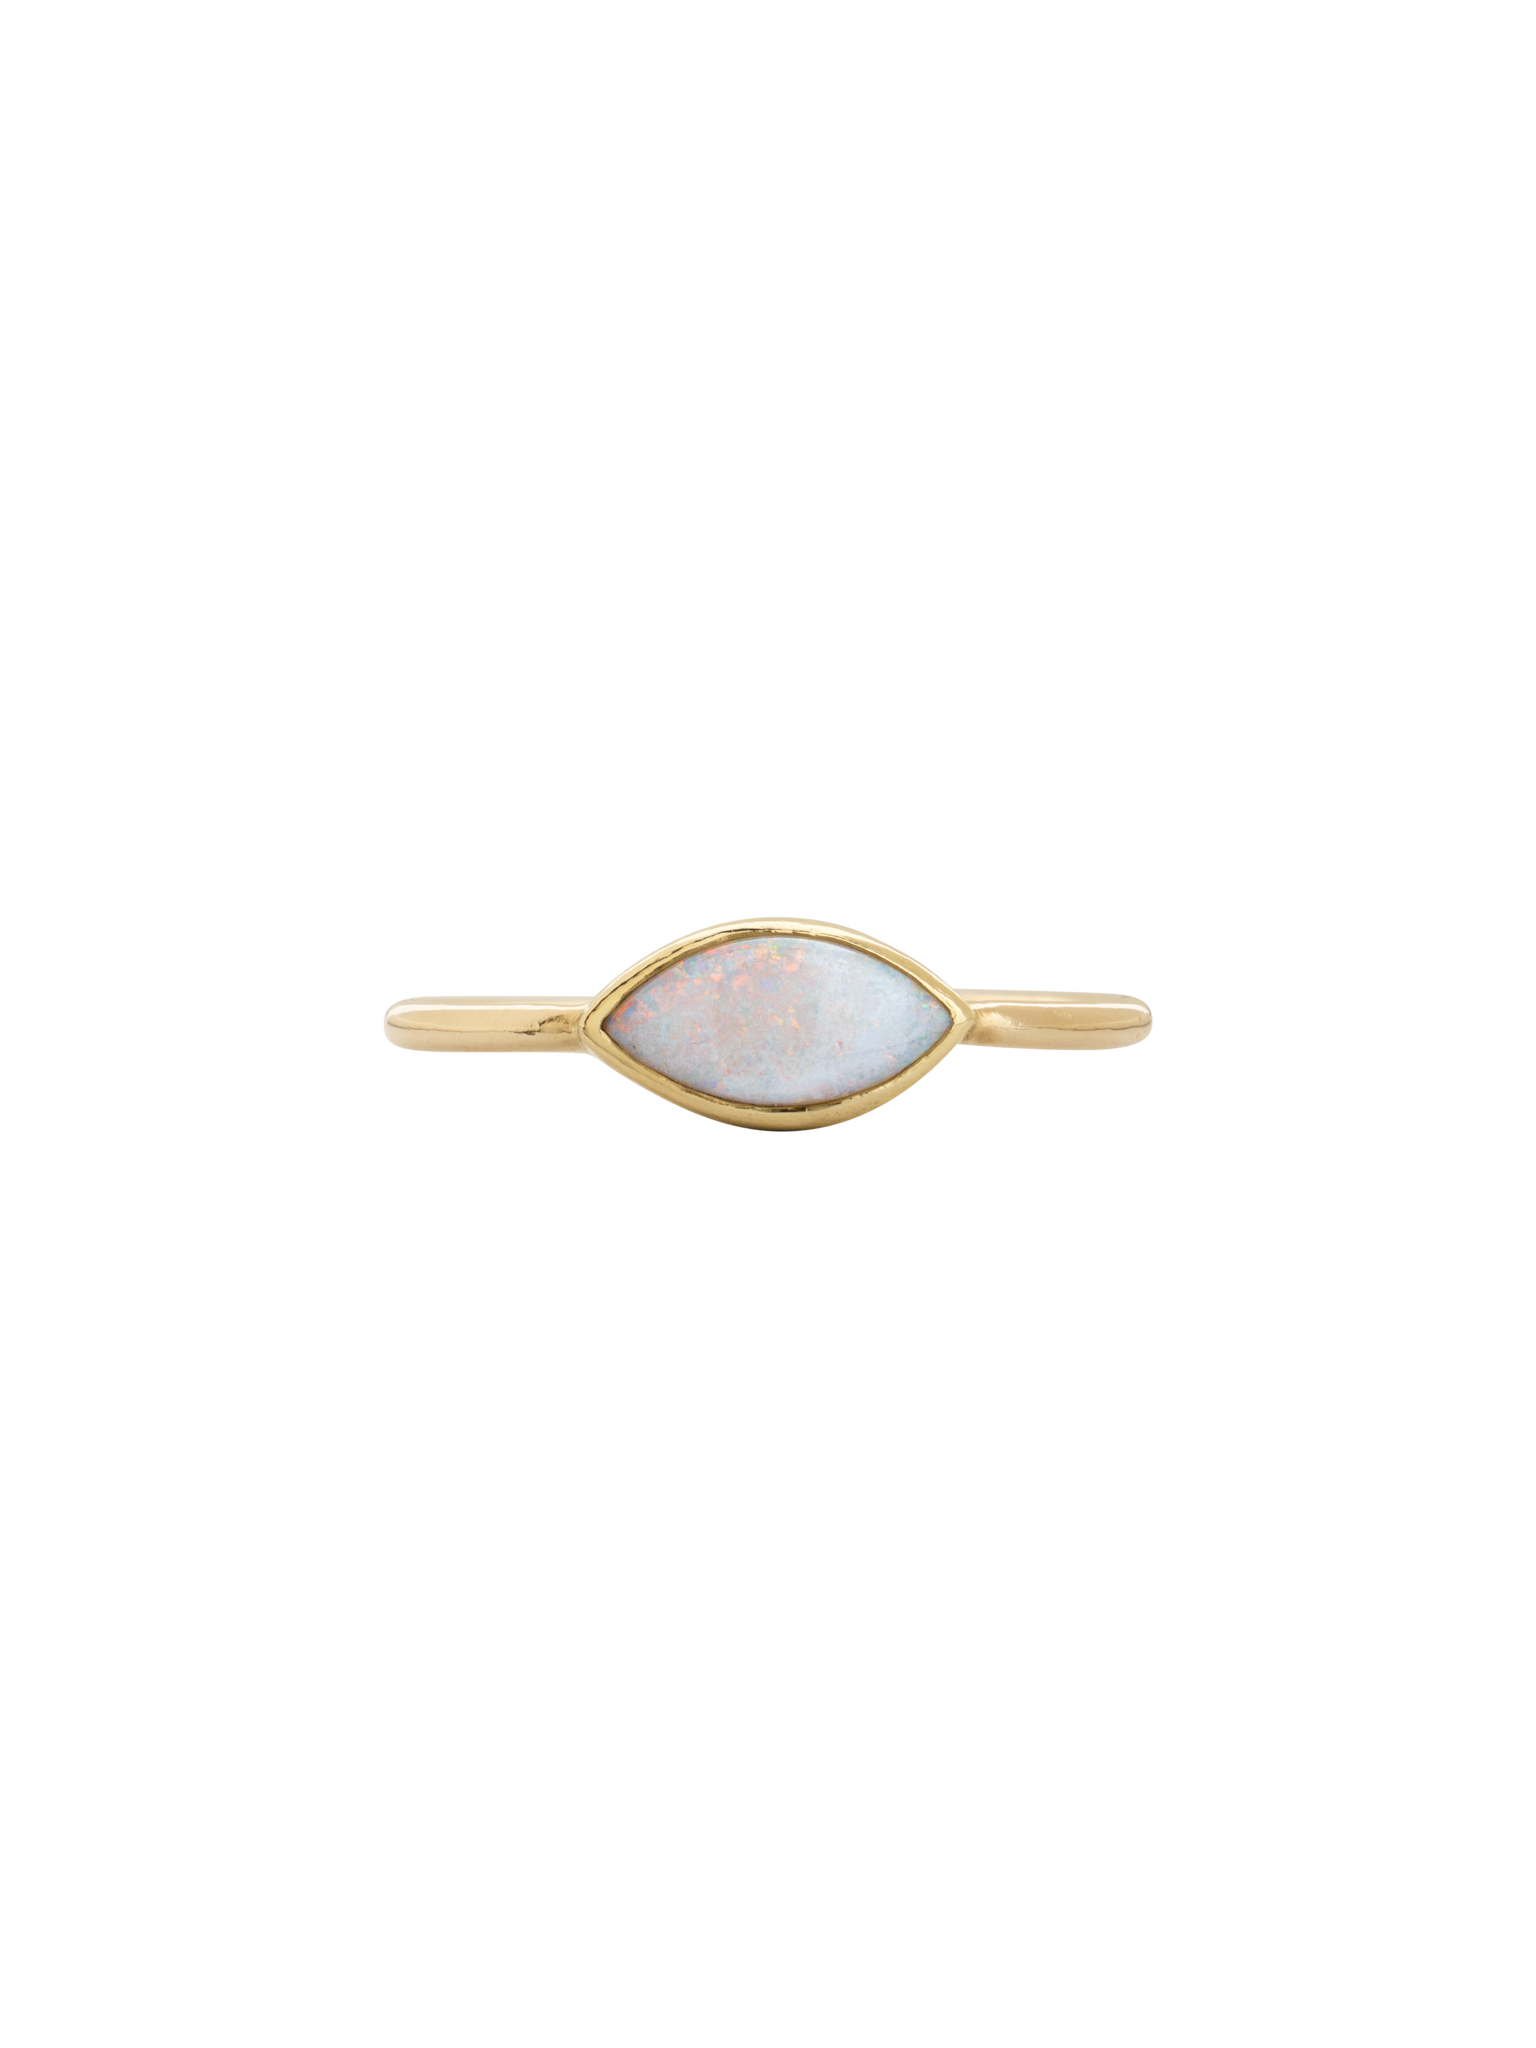 Marquise opal ring